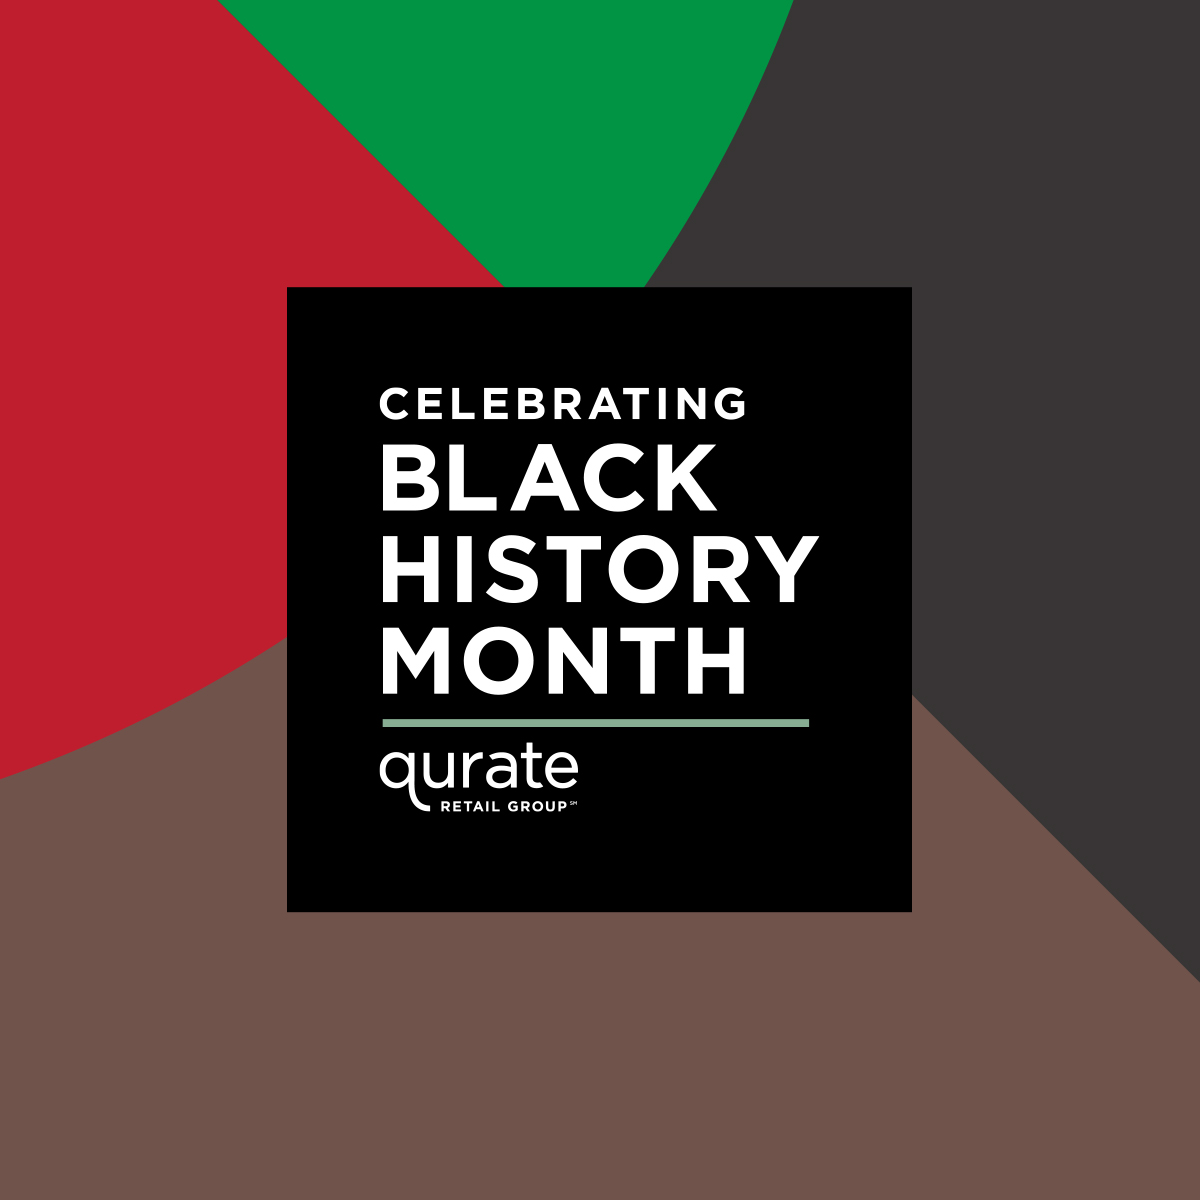 Graphic reading, "Celebrating Black History Month" above Qurate logo